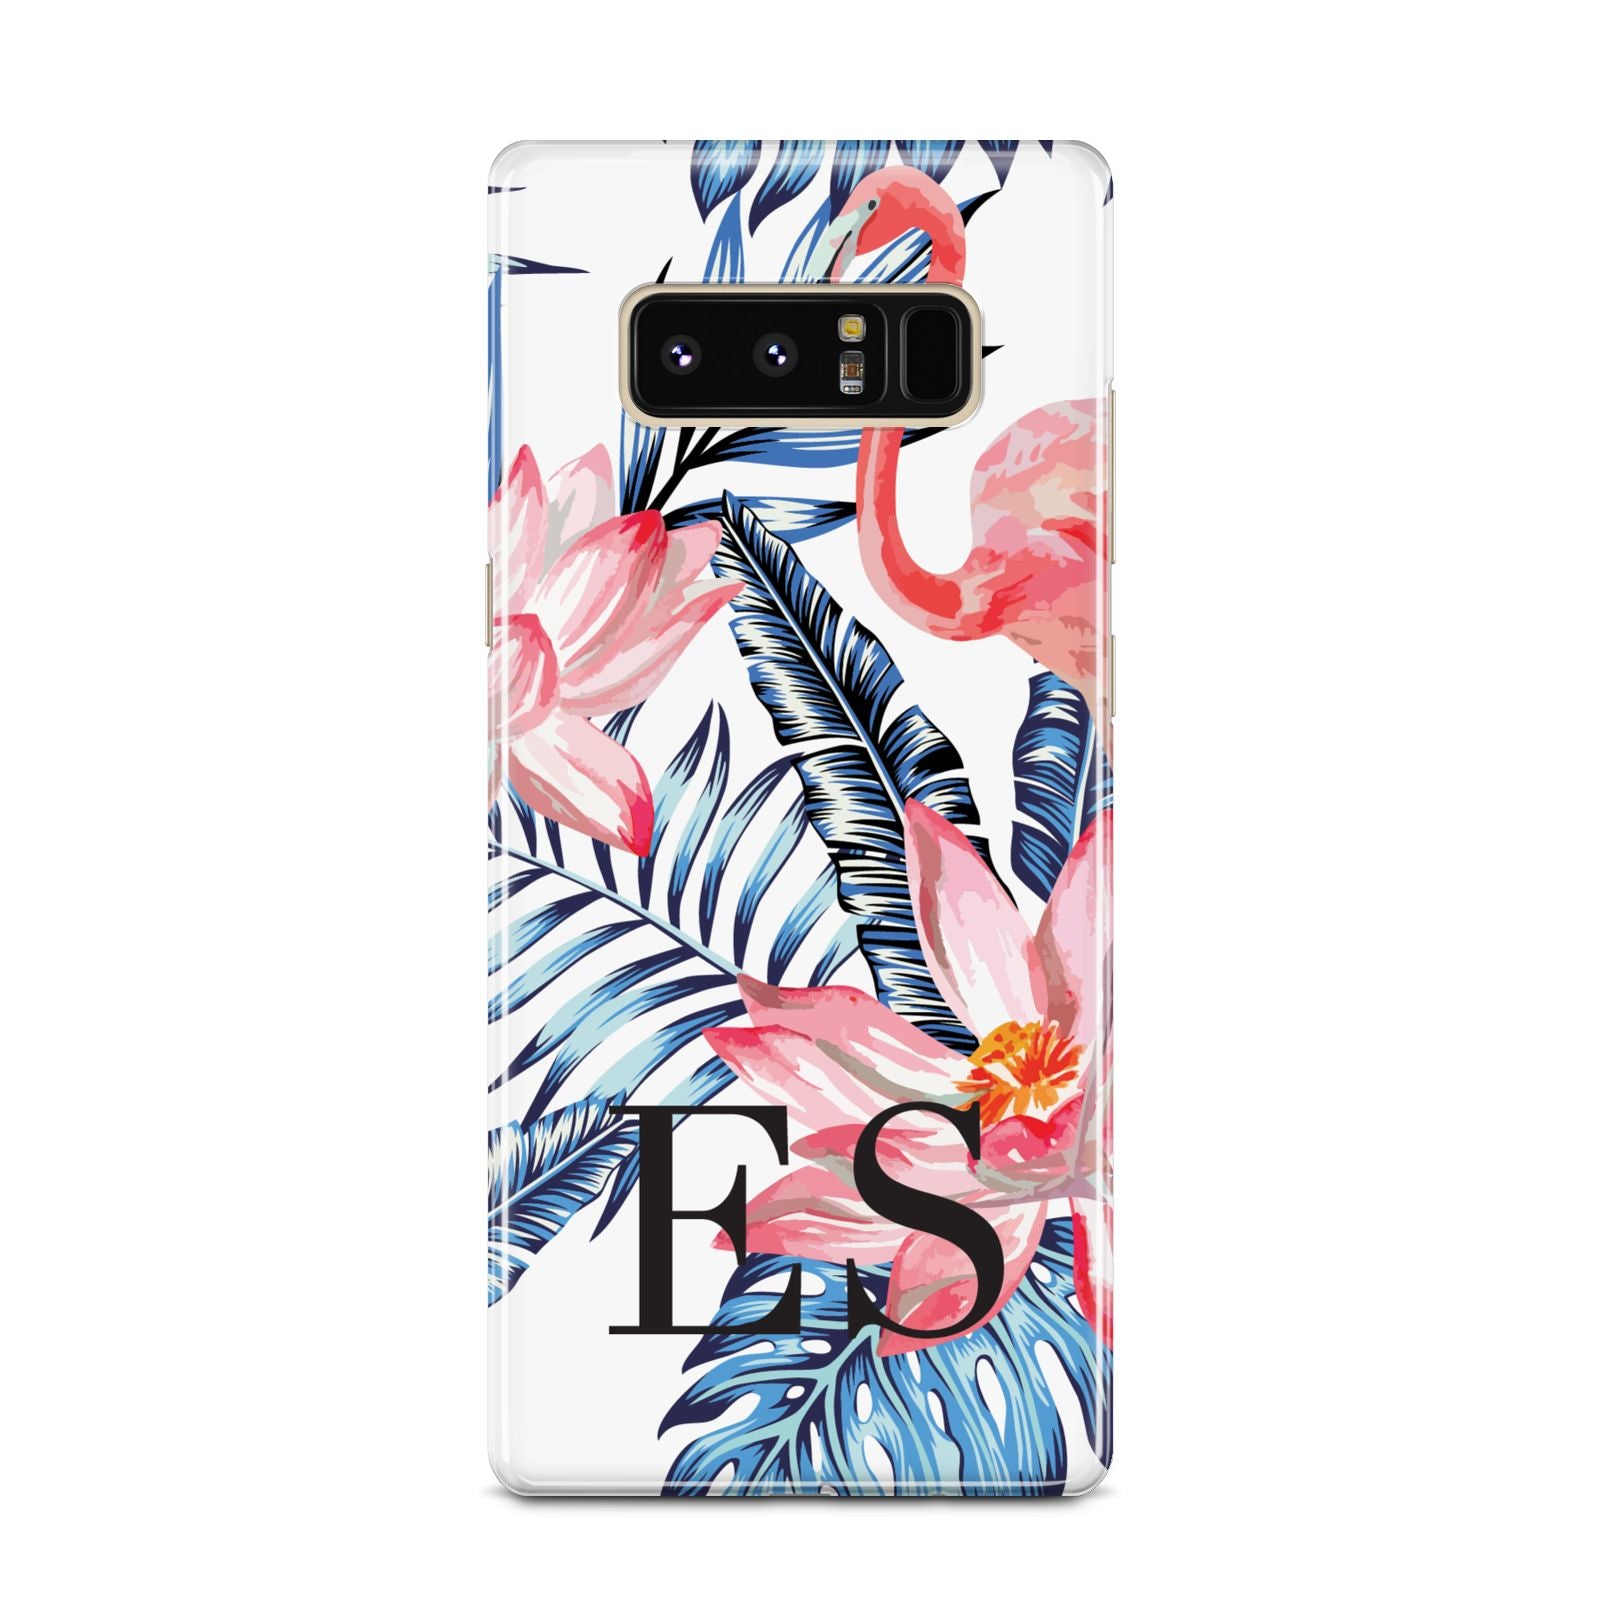 Blue Leaves Pink Flamingos Samsung Galaxy Note 8 Case